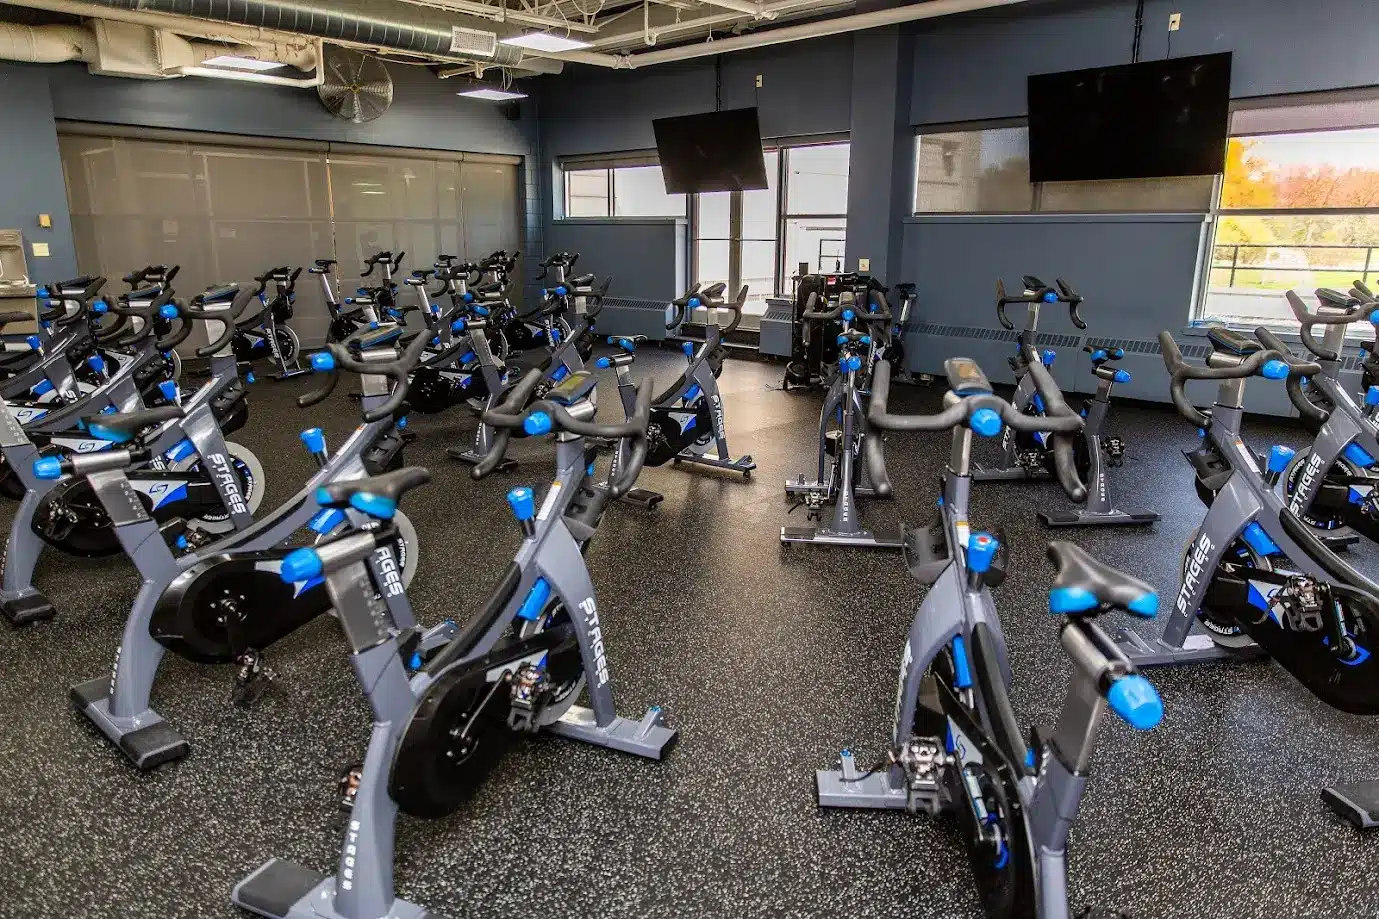 A room filled with multiple stationary bikes arranged in rows, each bike featuring a sleek design with blue accents. The room has large windows that let in natural light, and two large screens mounted on the walls. The flooring is a black speckled rubber material, and the room has a modern, clean, and well-lit atmosphere, suitable for group cycling classes.